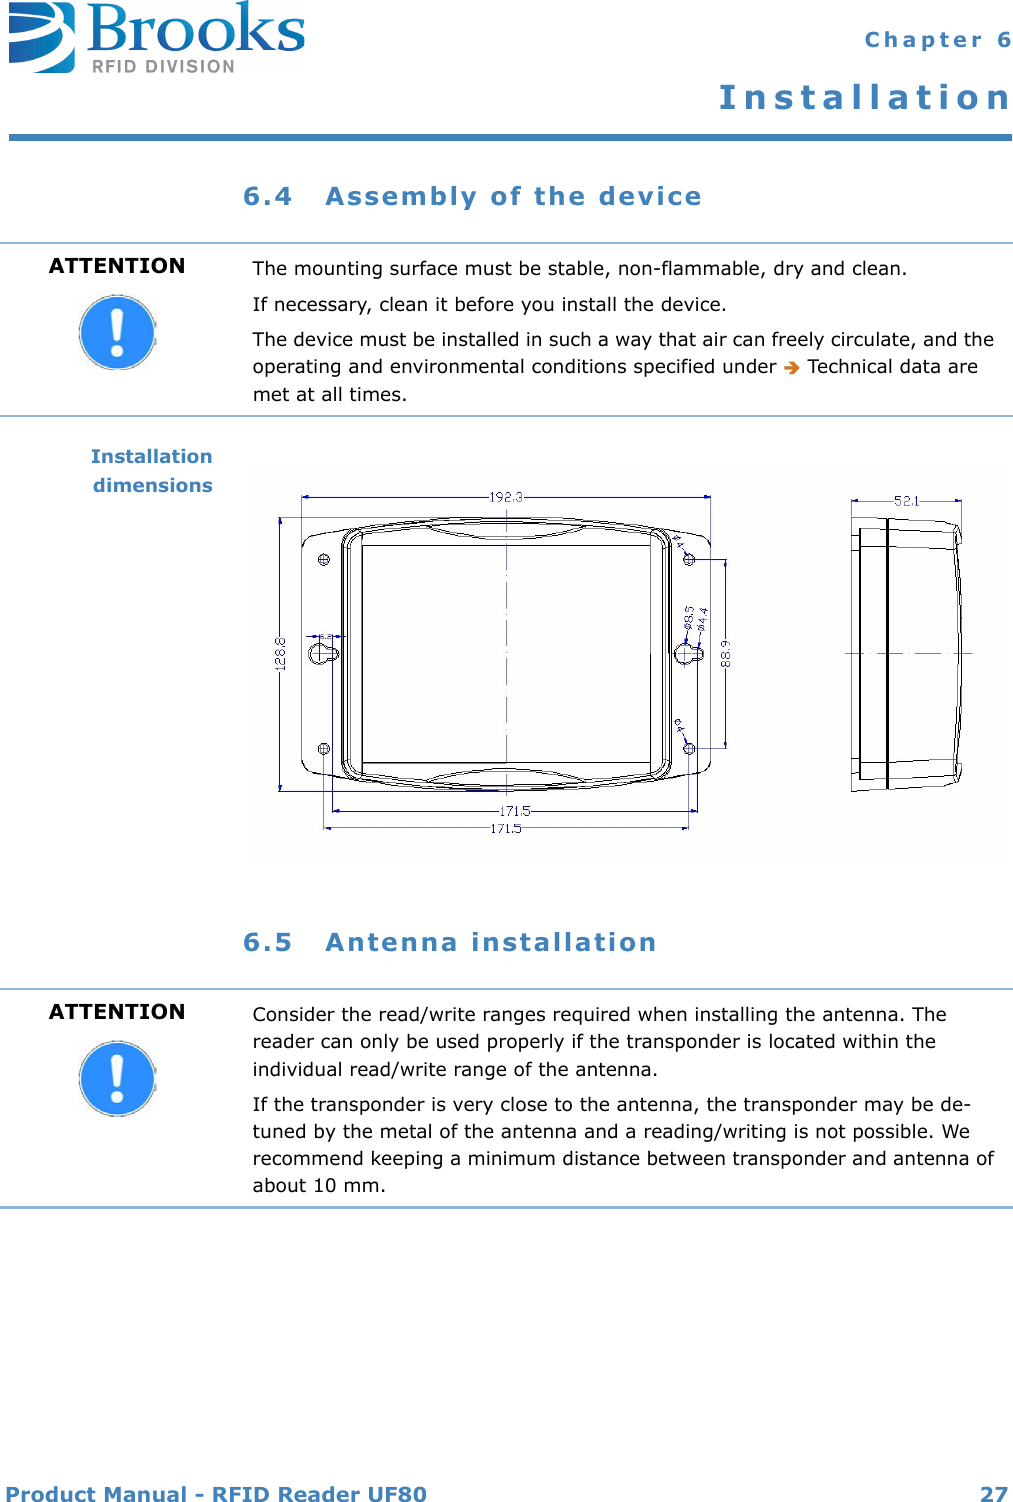 Product Manual - RFID Reader UF80 27 Chapter 6Installation6.4 Assembly of the deviceInstallationdimensions6.5 Antenna installationATTENTION The mounting surface must be stable, non-flammable, dry and clean.If necessary, clean it before you install the device.The device must be installed in such a way that air can freely circulate, and the operating and environmental conditions specified under  Technical data are met at all times.ATTENTION Consider the read/write ranges required when installing the antenna. The reader can only be used properly if the transponder is located within the individual read/write range of the antenna.If the transponder is very close to the antenna, the transponder may be de-tuned by the metal of the antenna and a reading/writing is not possible. We recommend keeping a minimum distance between transponder and antenna of about 10 mm.